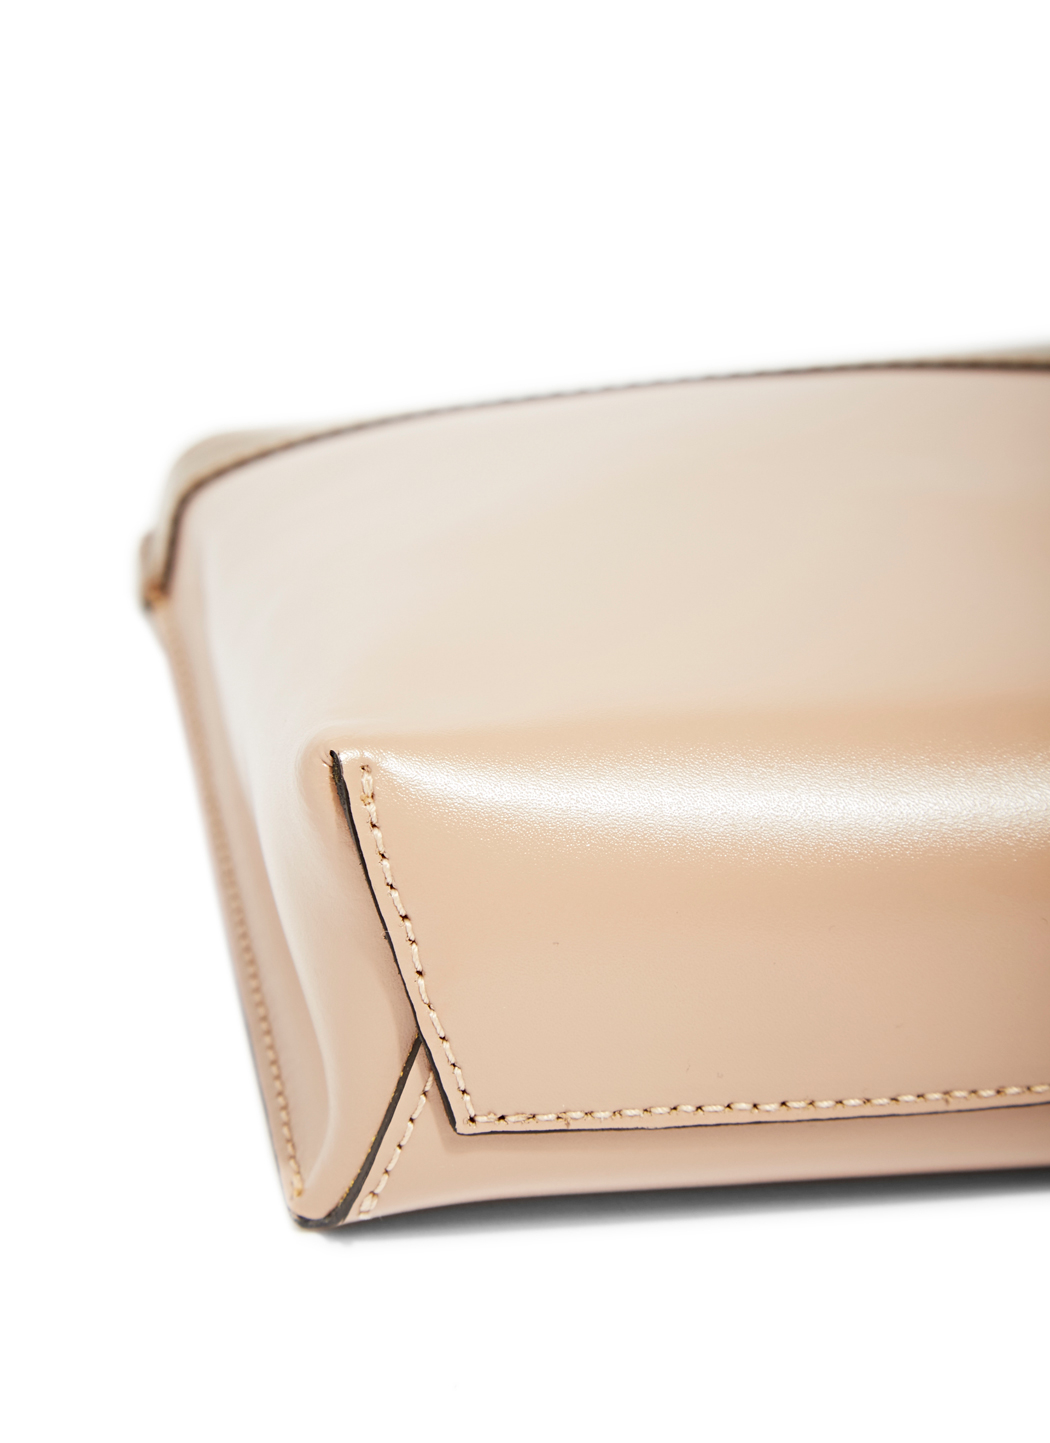 Marni Leather Clutch Bag in Brown | Lyst